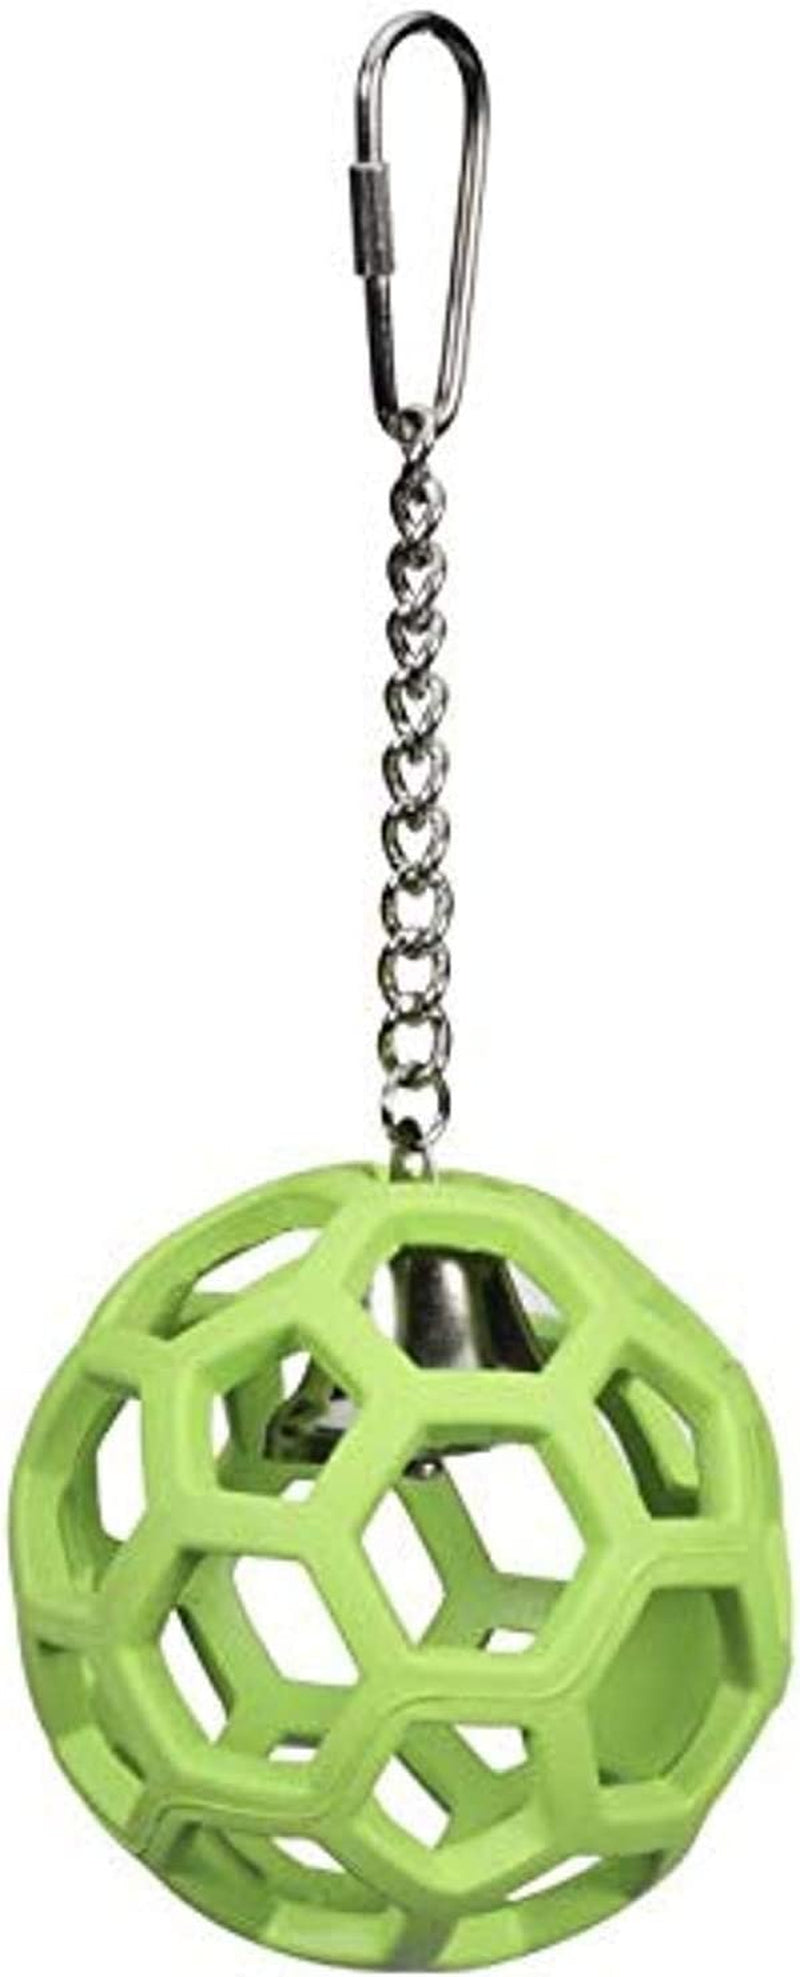 JW Pet Company Activitoys Hol-Ee Roller Parrot Toy, 4 Inch Diameter (Colors Vary )